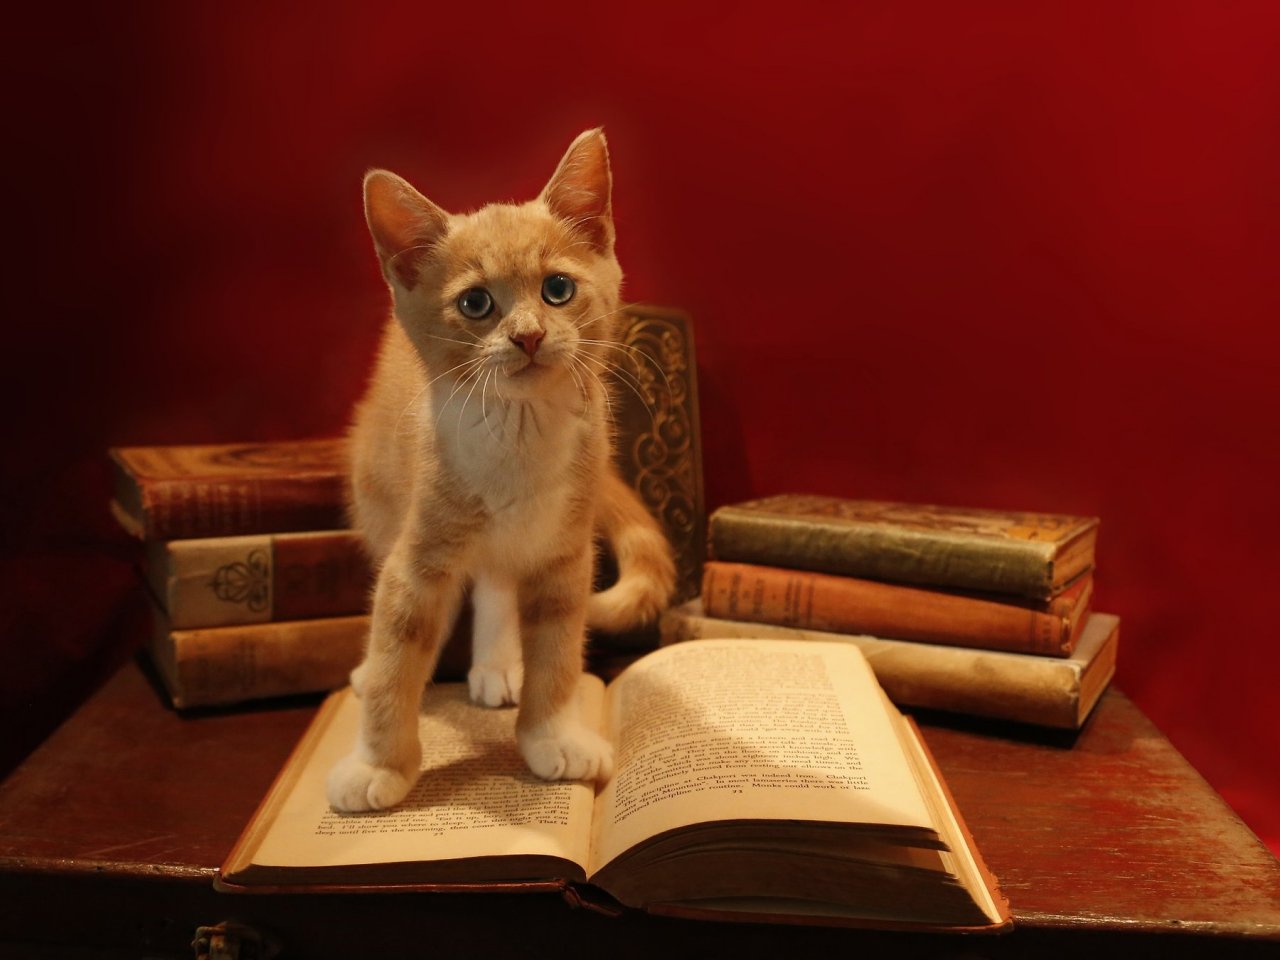 Kitten on the Books Online Jigsaw Puzzle